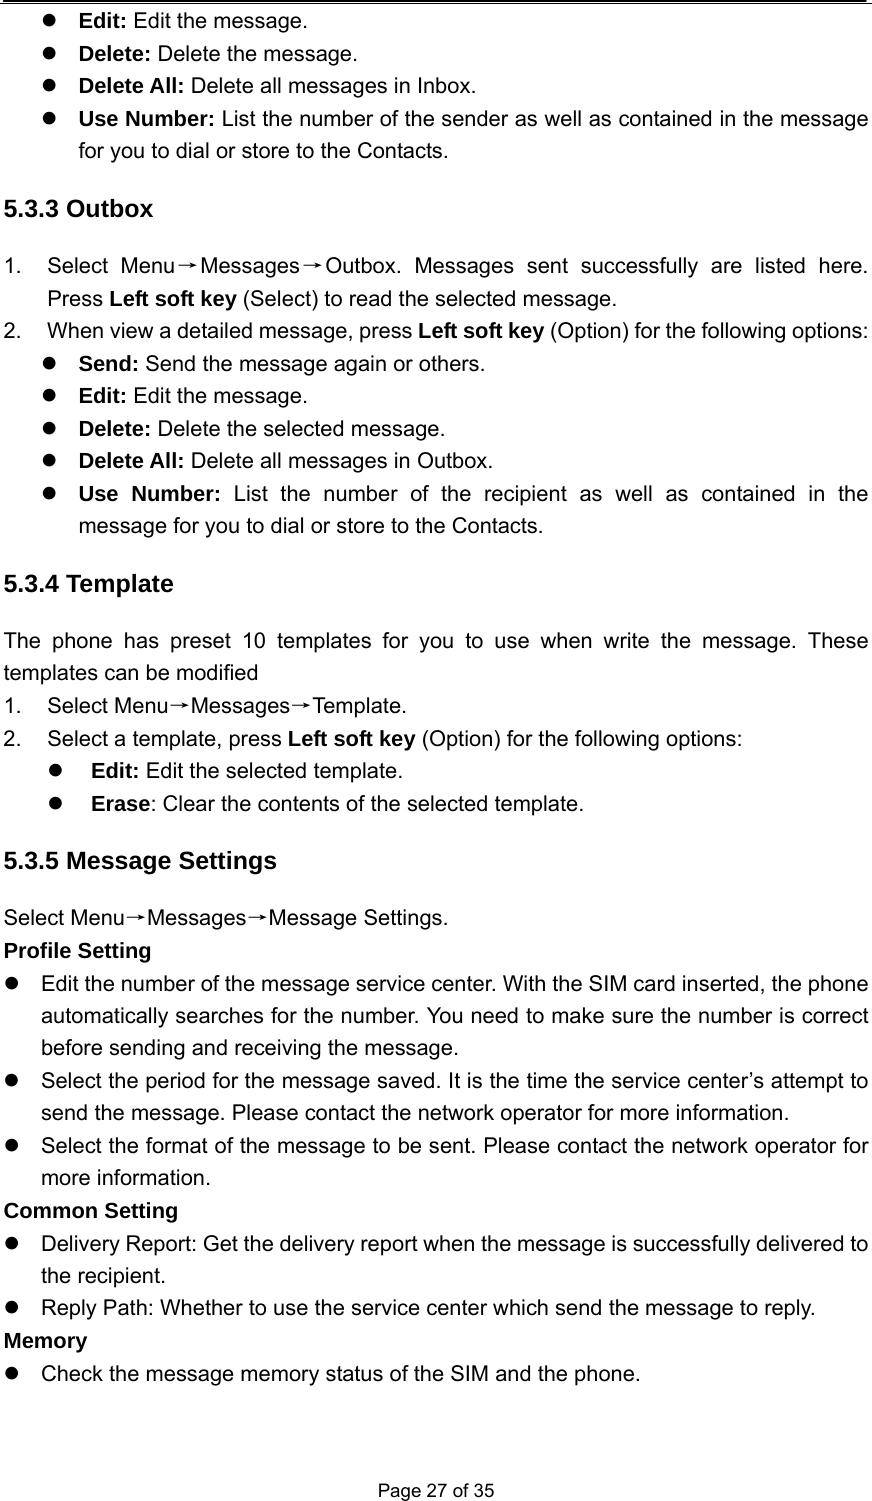  Page 27 of 35 z Edit: Edit the message. z Delete: Delete the message. z Delete All: Delete all messages in Inbox. z Use Number: List the number of the sender as well as contained in the message for you to dial or store to the Contacts. 5.3.3 Outbox 1. Select Menu→Messages→Outbox. Messages sent successfully are listed here. Press Left soft key (Select) to read the selected message. 2.  When view a detailed message, press Left soft key (Option) for the following options:   z Send: Send the message again or others. z Edit: Edit the message. z Delete: Delete the selected message. z Delete All: Delete all messages in Outbox. z Use Number: List the number of the recipient as well as contained in the message for you to dial or store to the Contacts. 5.3.4 Template The phone has preset 10 templates for you to use when write the message. These templates can be modified 1. Select Menu→Messages→Template. 2.  Select a template, press Left soft key (Option) for the following options: z Edit: Edit the selected template. z Erase: Clear the contents of the selected template. 5.3.5 Message Settings Select Menu→Messages→Message Settings. Profile Setting z  Edit the number of the message service center. With the SIM card inserted, the phone automatically searches for the number. You need to make sure the number is correct before sending and receiving the message. z  Select the period for the message saved. It is the time the service center’s attempt to send the message. Please contact the network operator for more information. z  Select the format of the message to be sent. Please contact the network operator for more information. Common Setting z  Delivery Report: Get the delivery report when the message is successfully delivered to the recipient. z  Reply Path: Whether to use the service center which send the message to reply. Memory z  Check the message memory status of the SIM and the phone. 